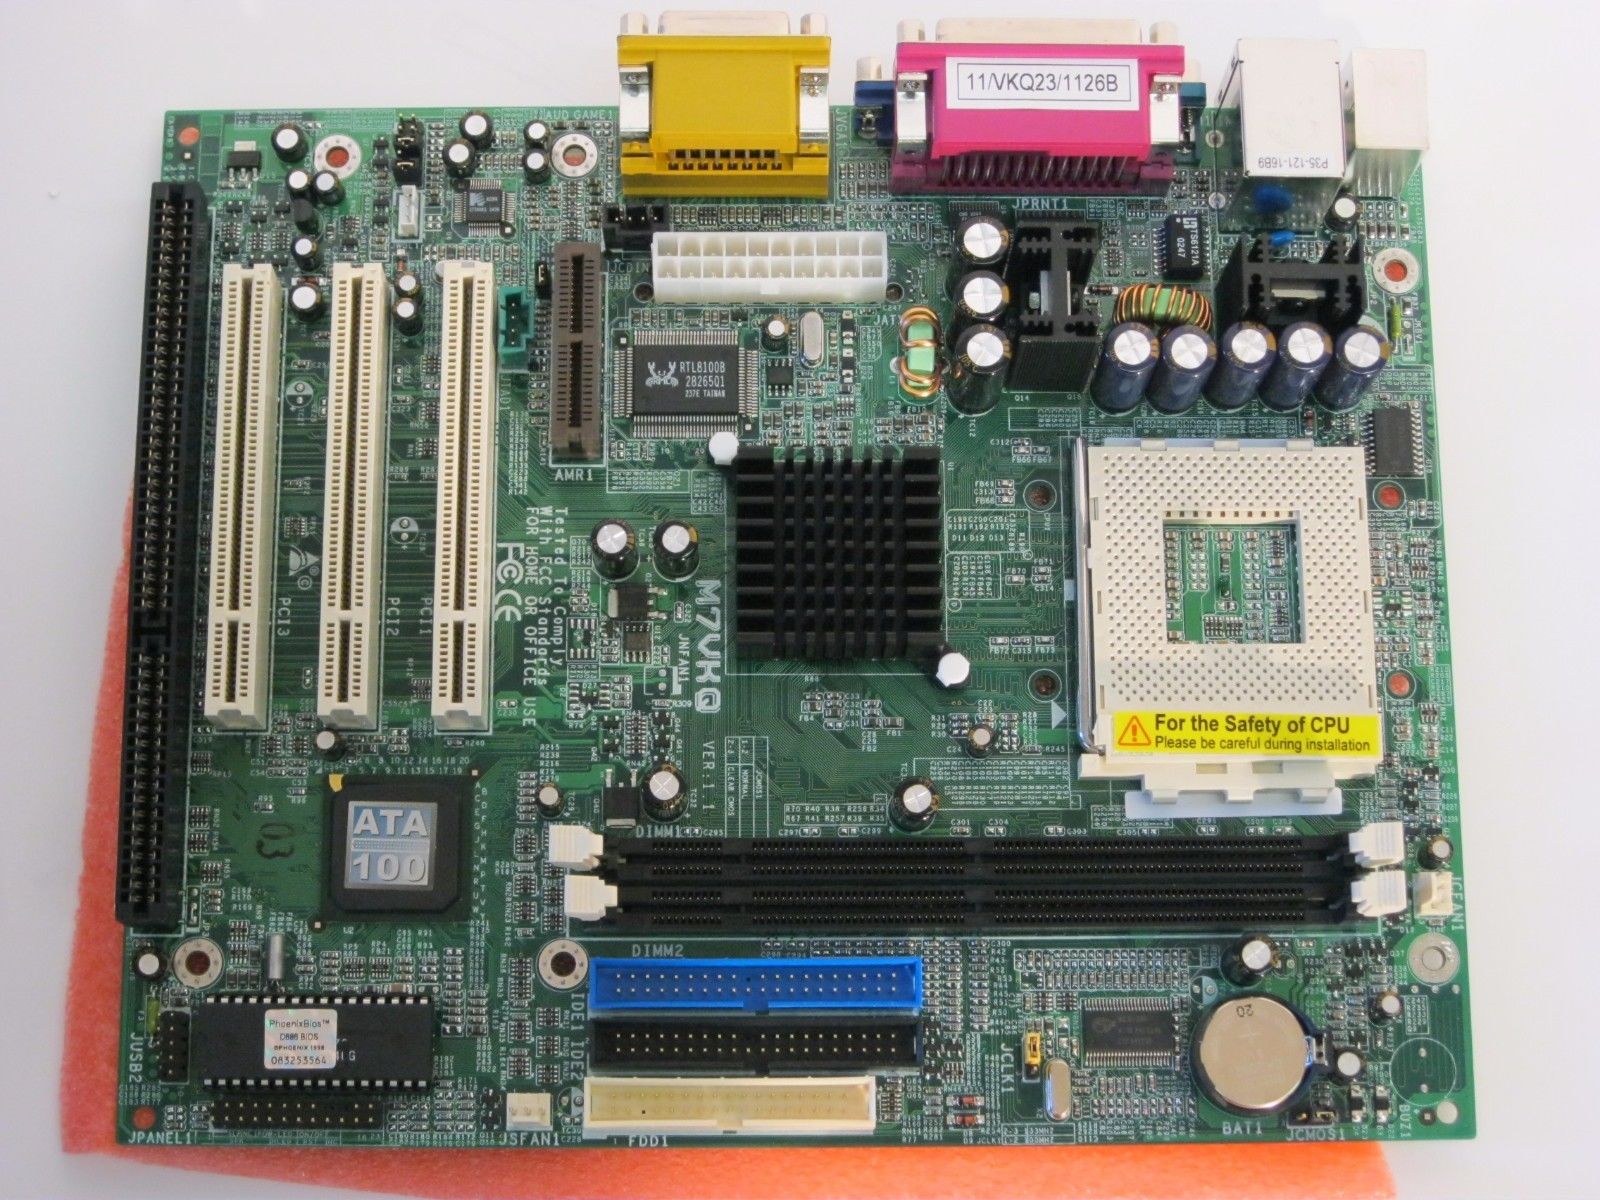 Motherboard photo